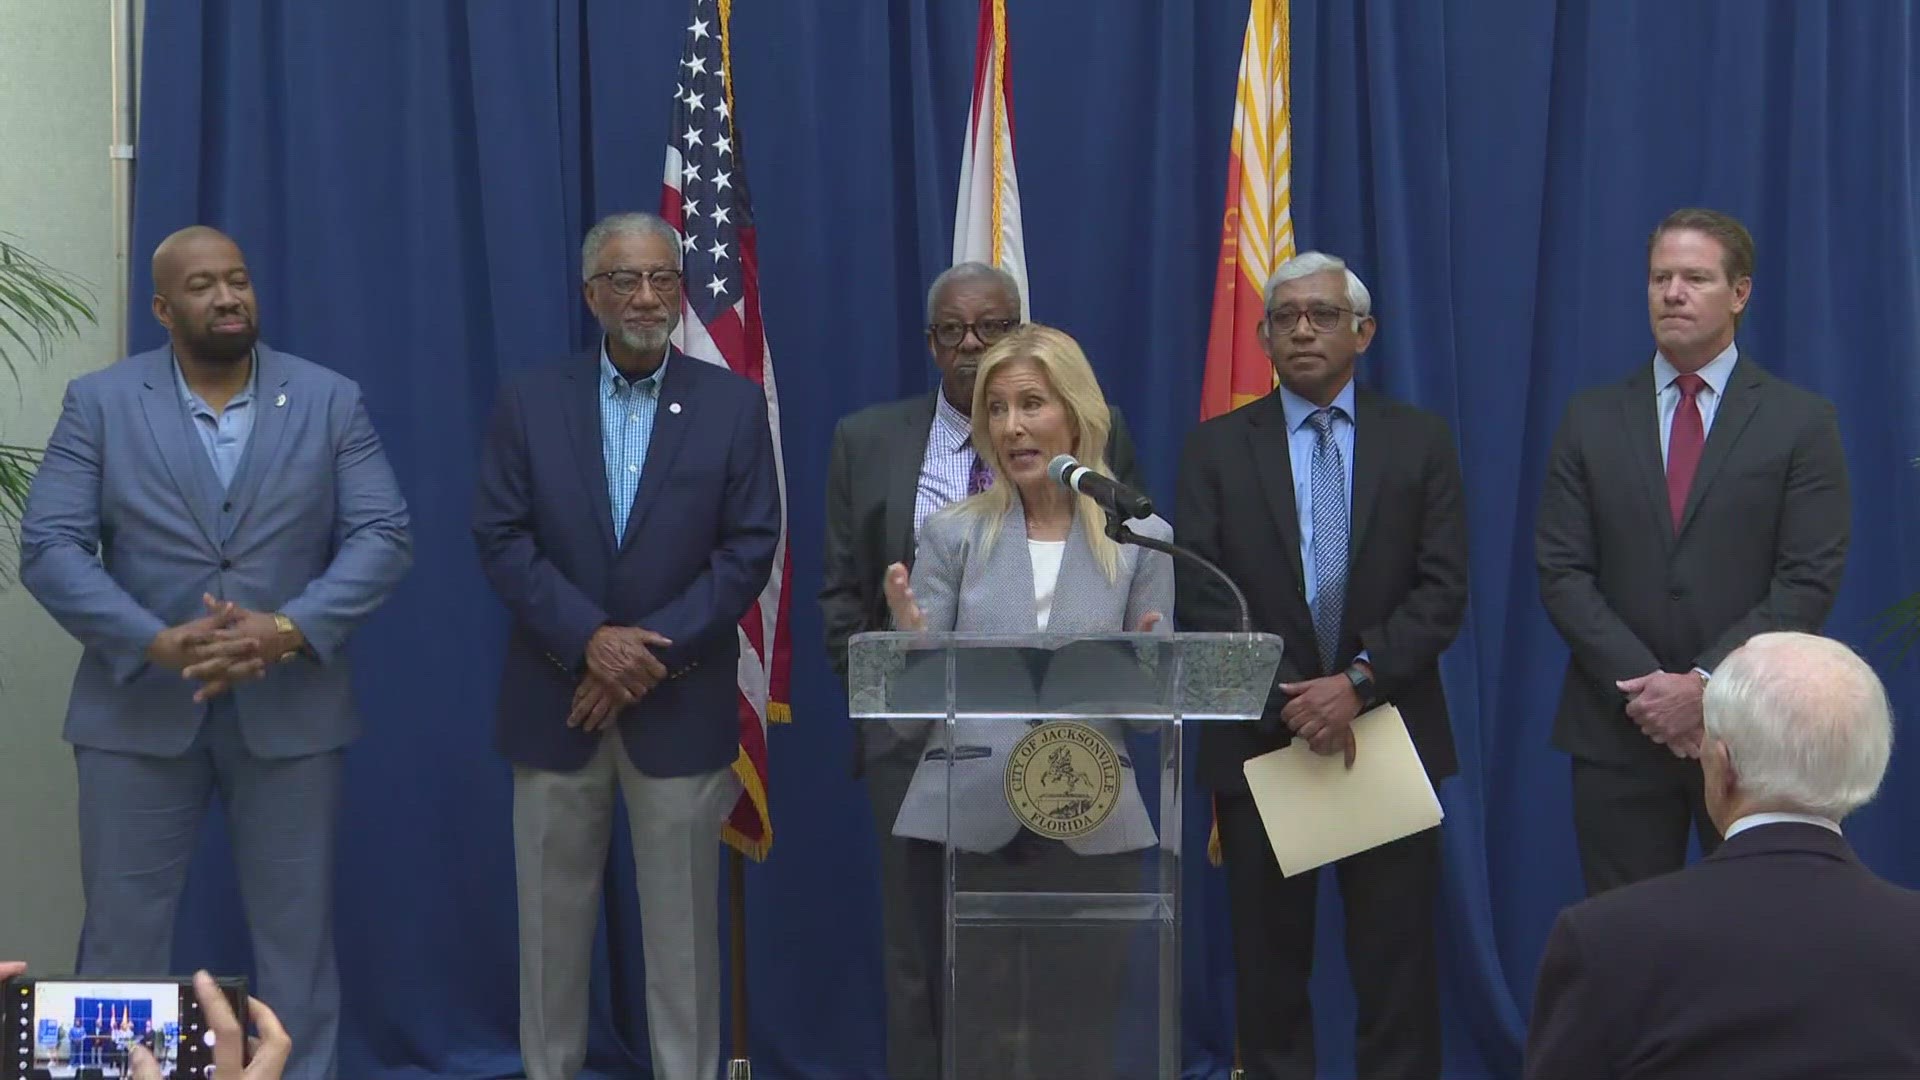 Mayor Donna Deegan made the announcement alongside leaders from the Jacksonville NAACP, Jacksonville Urban League, JAX Chamber, and Jacksonville City Council.